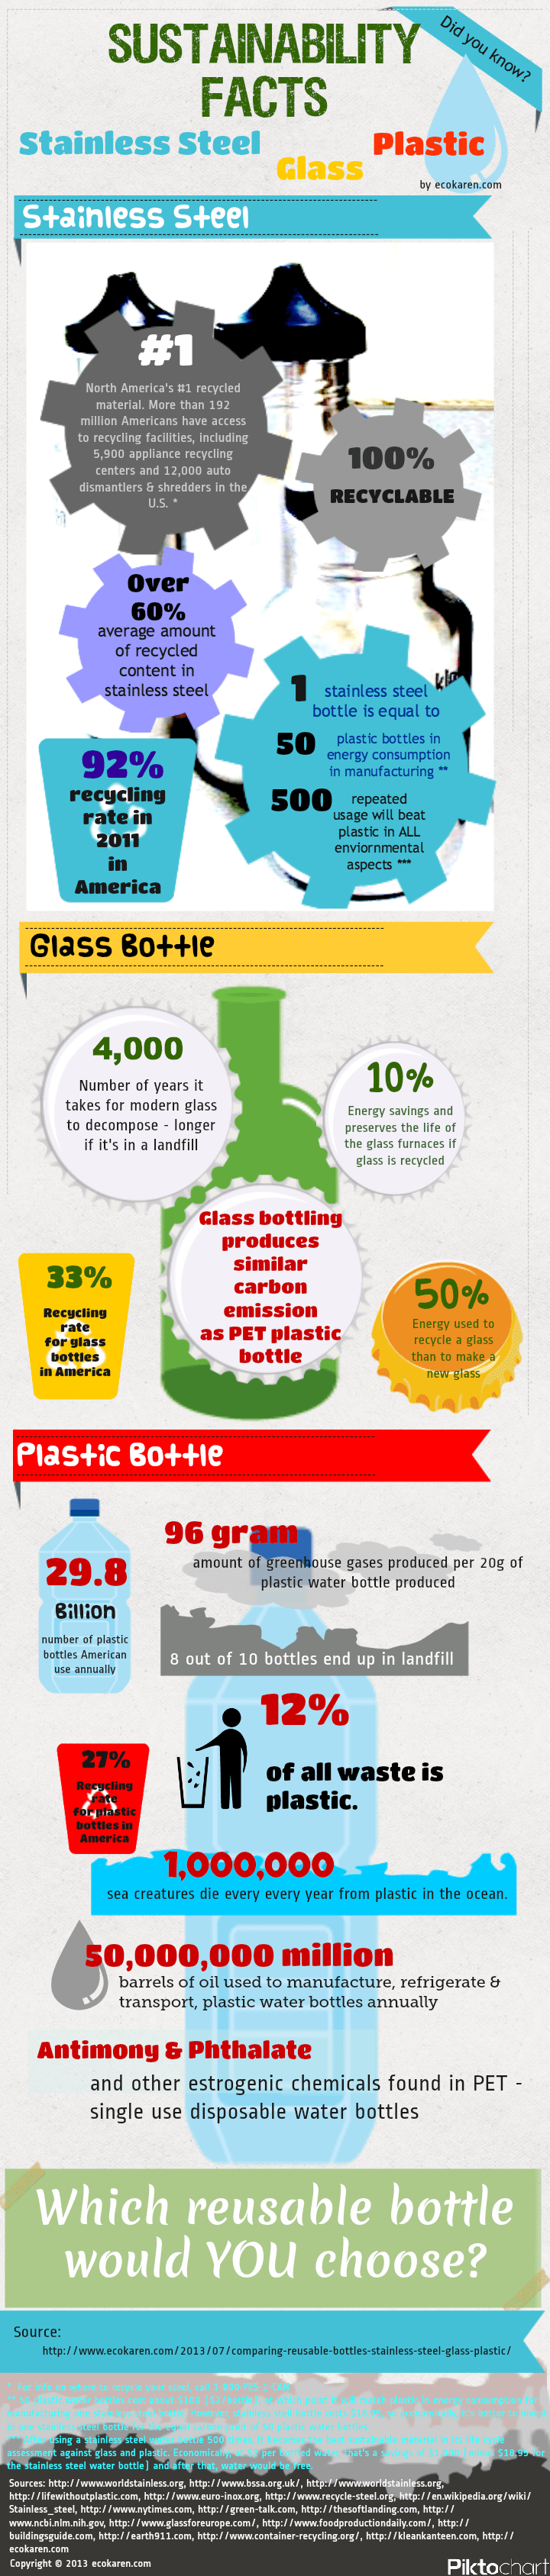 Sustainability facts about stainless steel, glass bottle, and plastic bottles